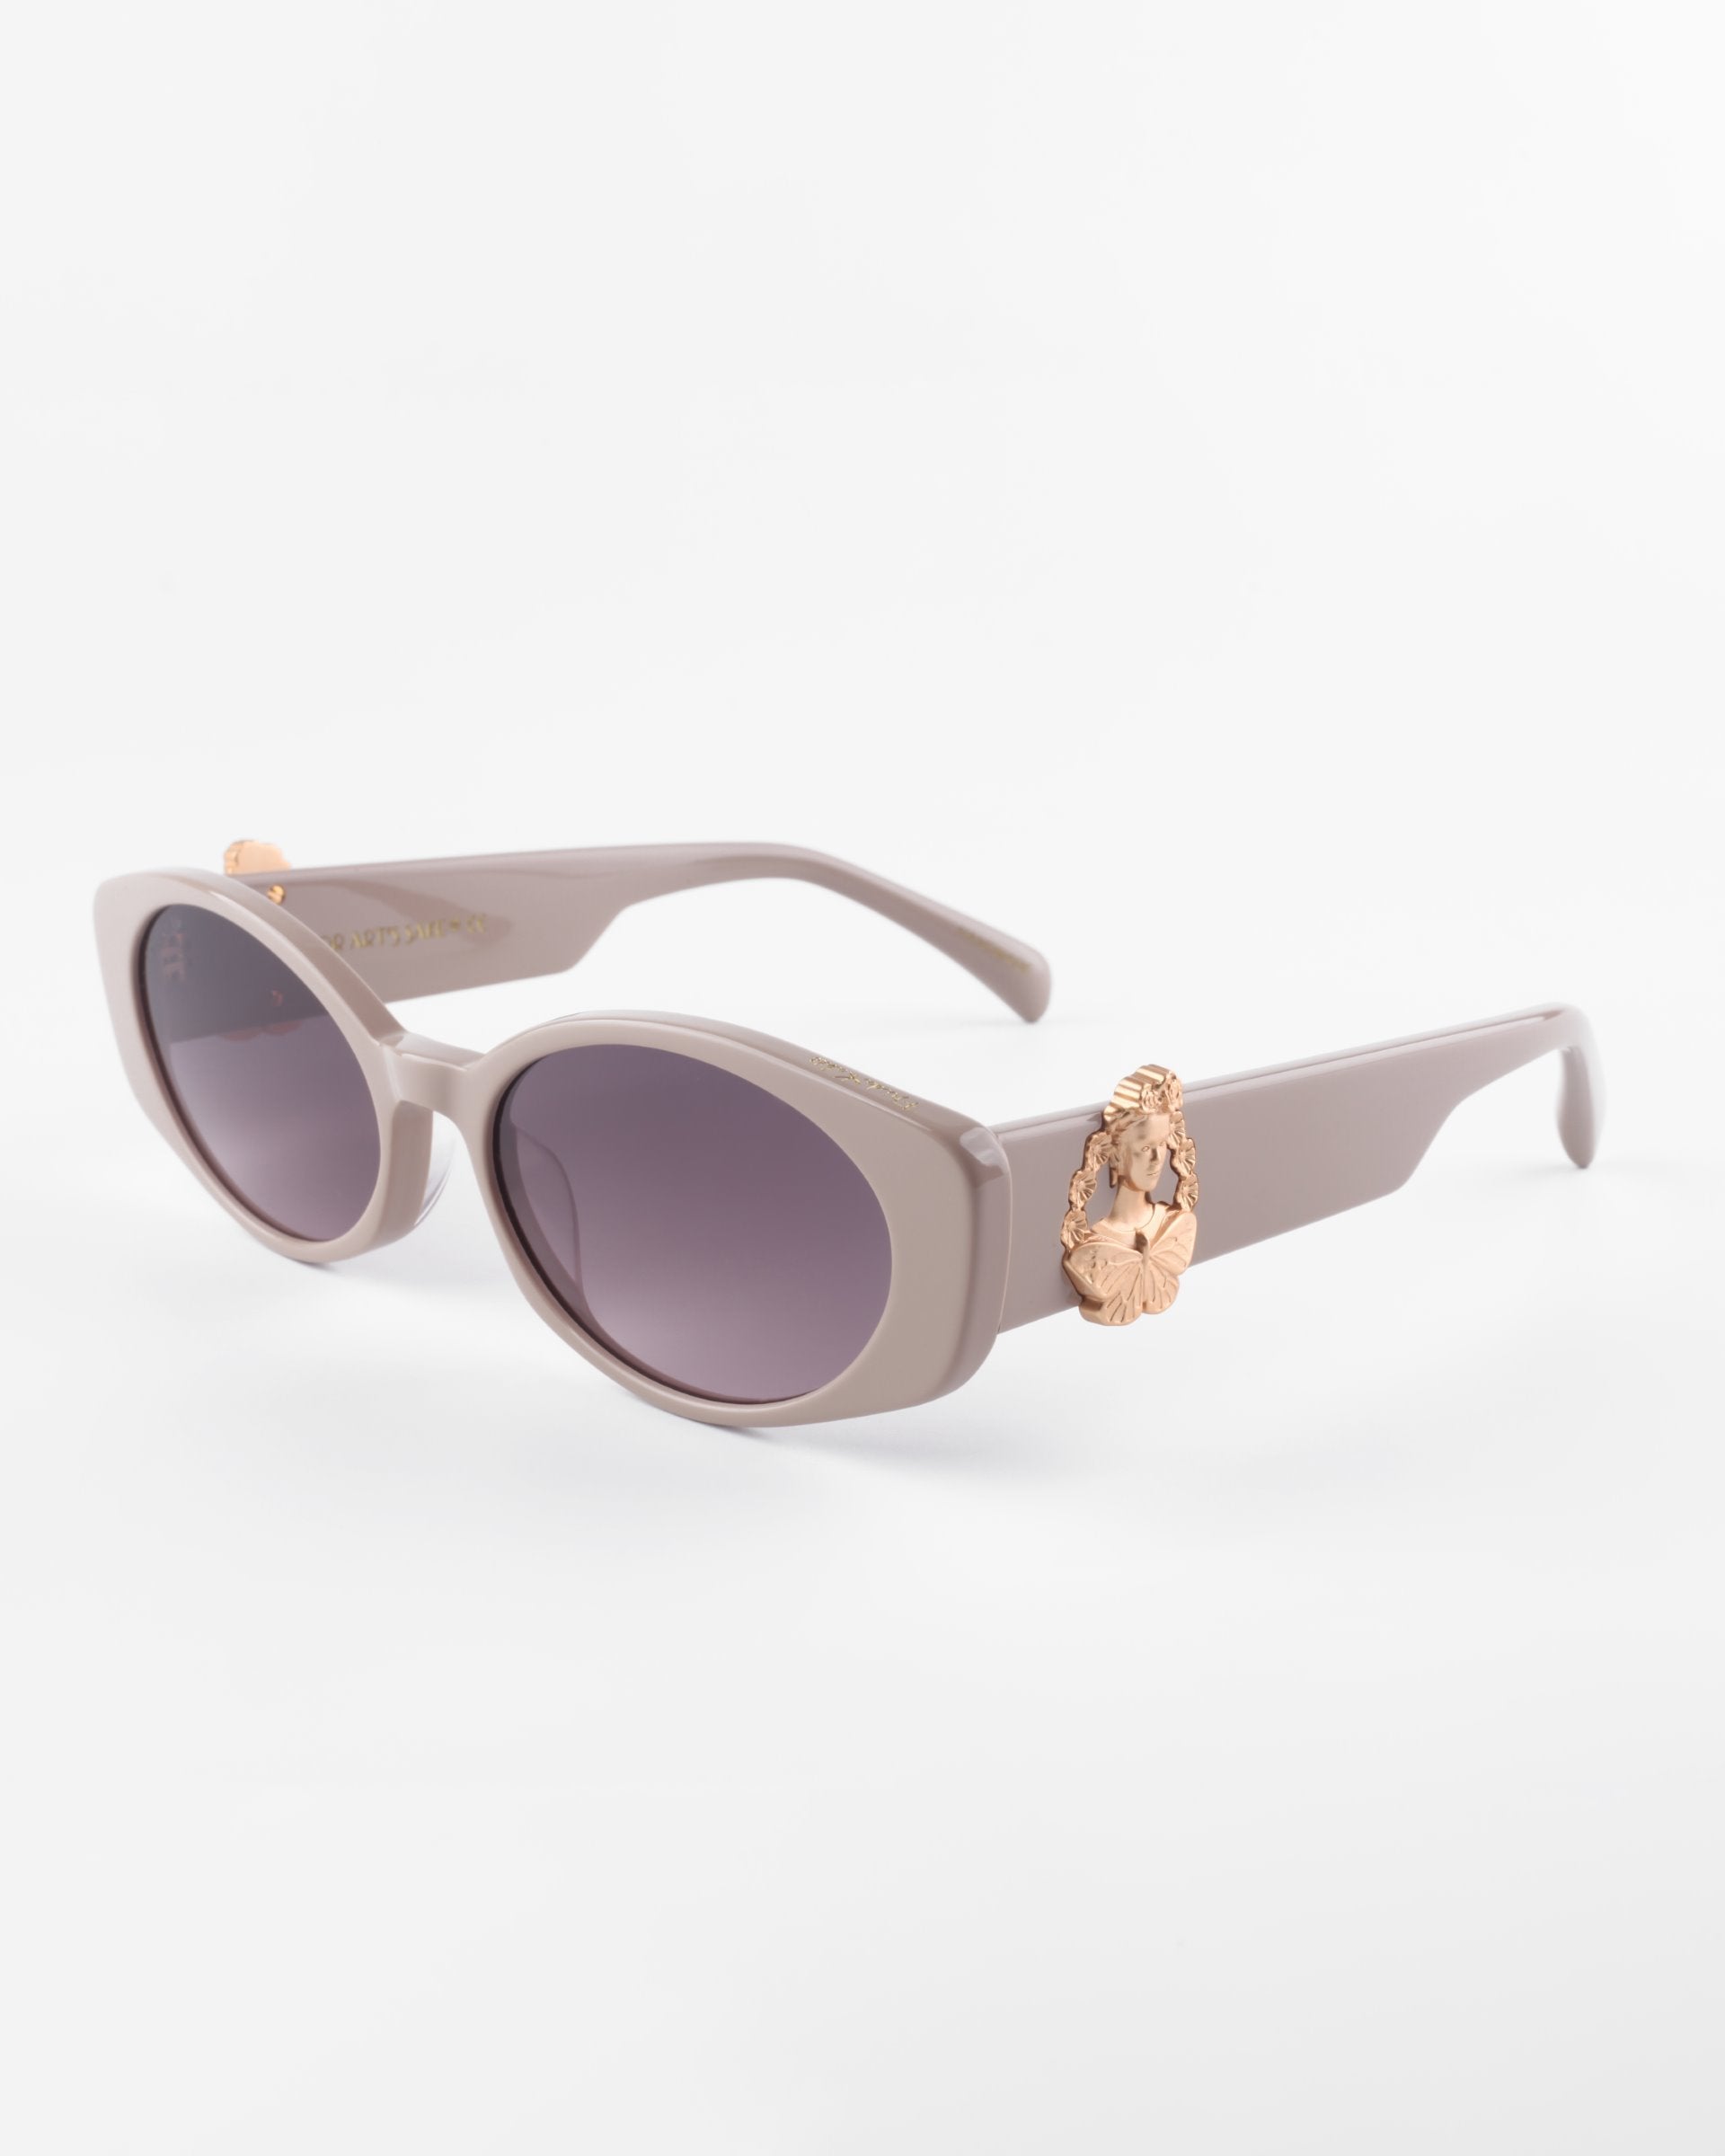 Oval-shaped, muted lavender Frida Portrait sunglasses by For Art&#39;s Sake® with ultra-lightweight nylon lenses offering 100% UVA &amp; UVB protection. The frame features an ornate, 18-karat gold-plated decorative element on the temples near the hinges. The background is a plain white surface.